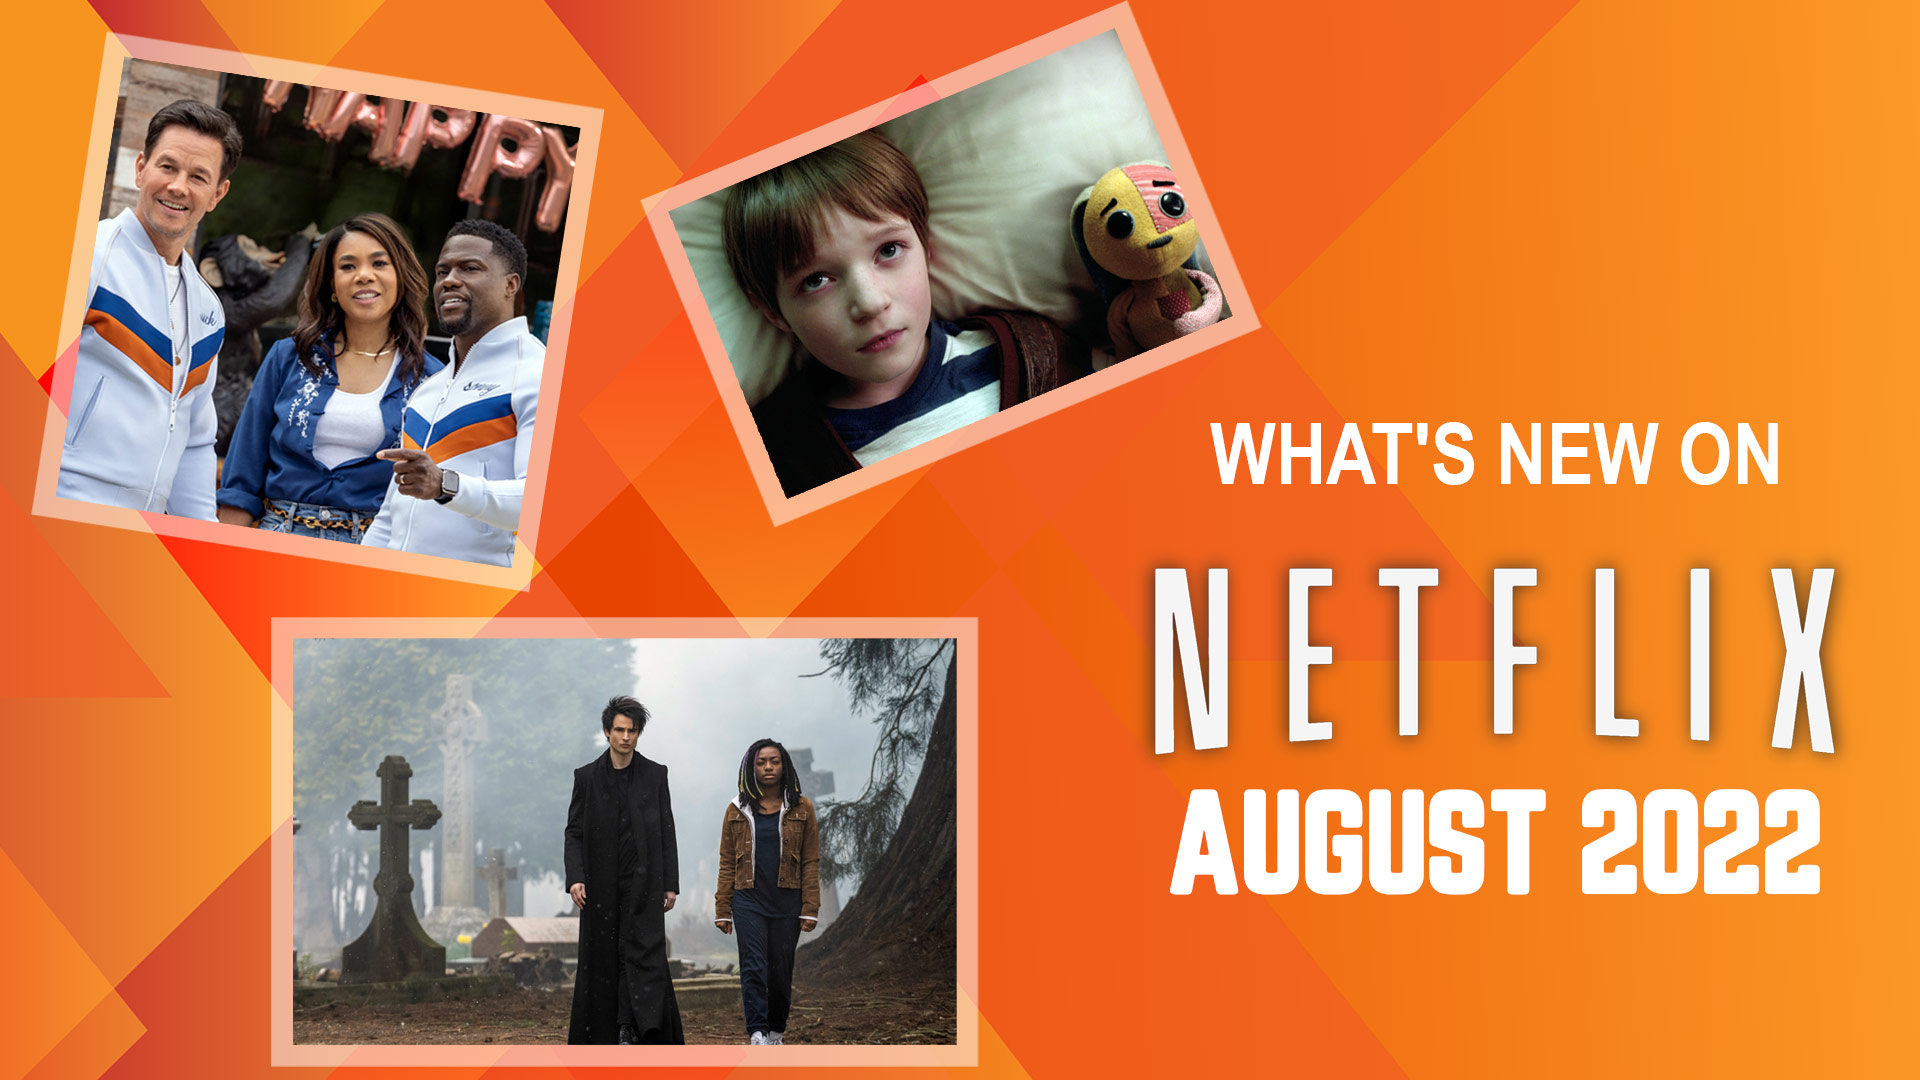 What's New on Netflix August 2022